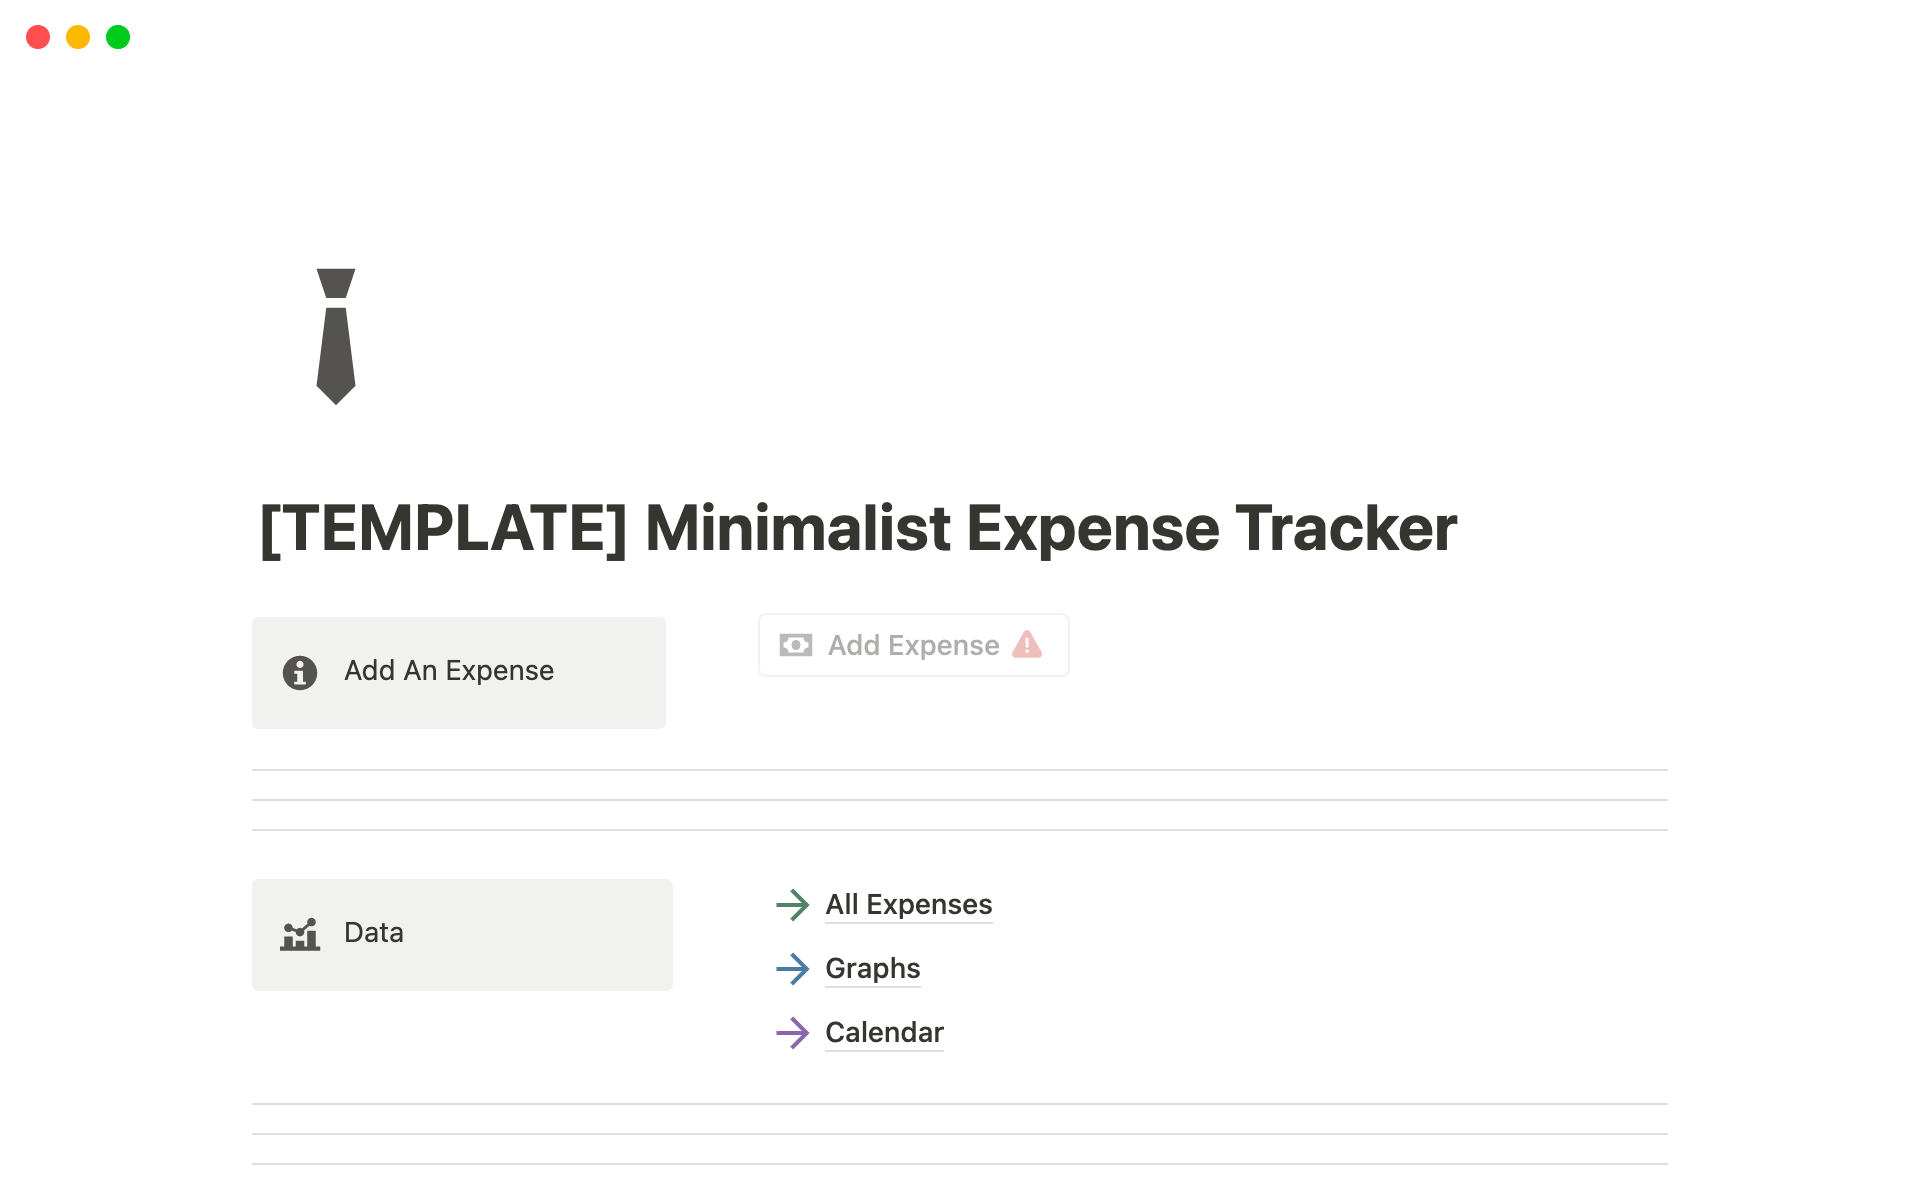 It allows you to add and track all your personal expenses.